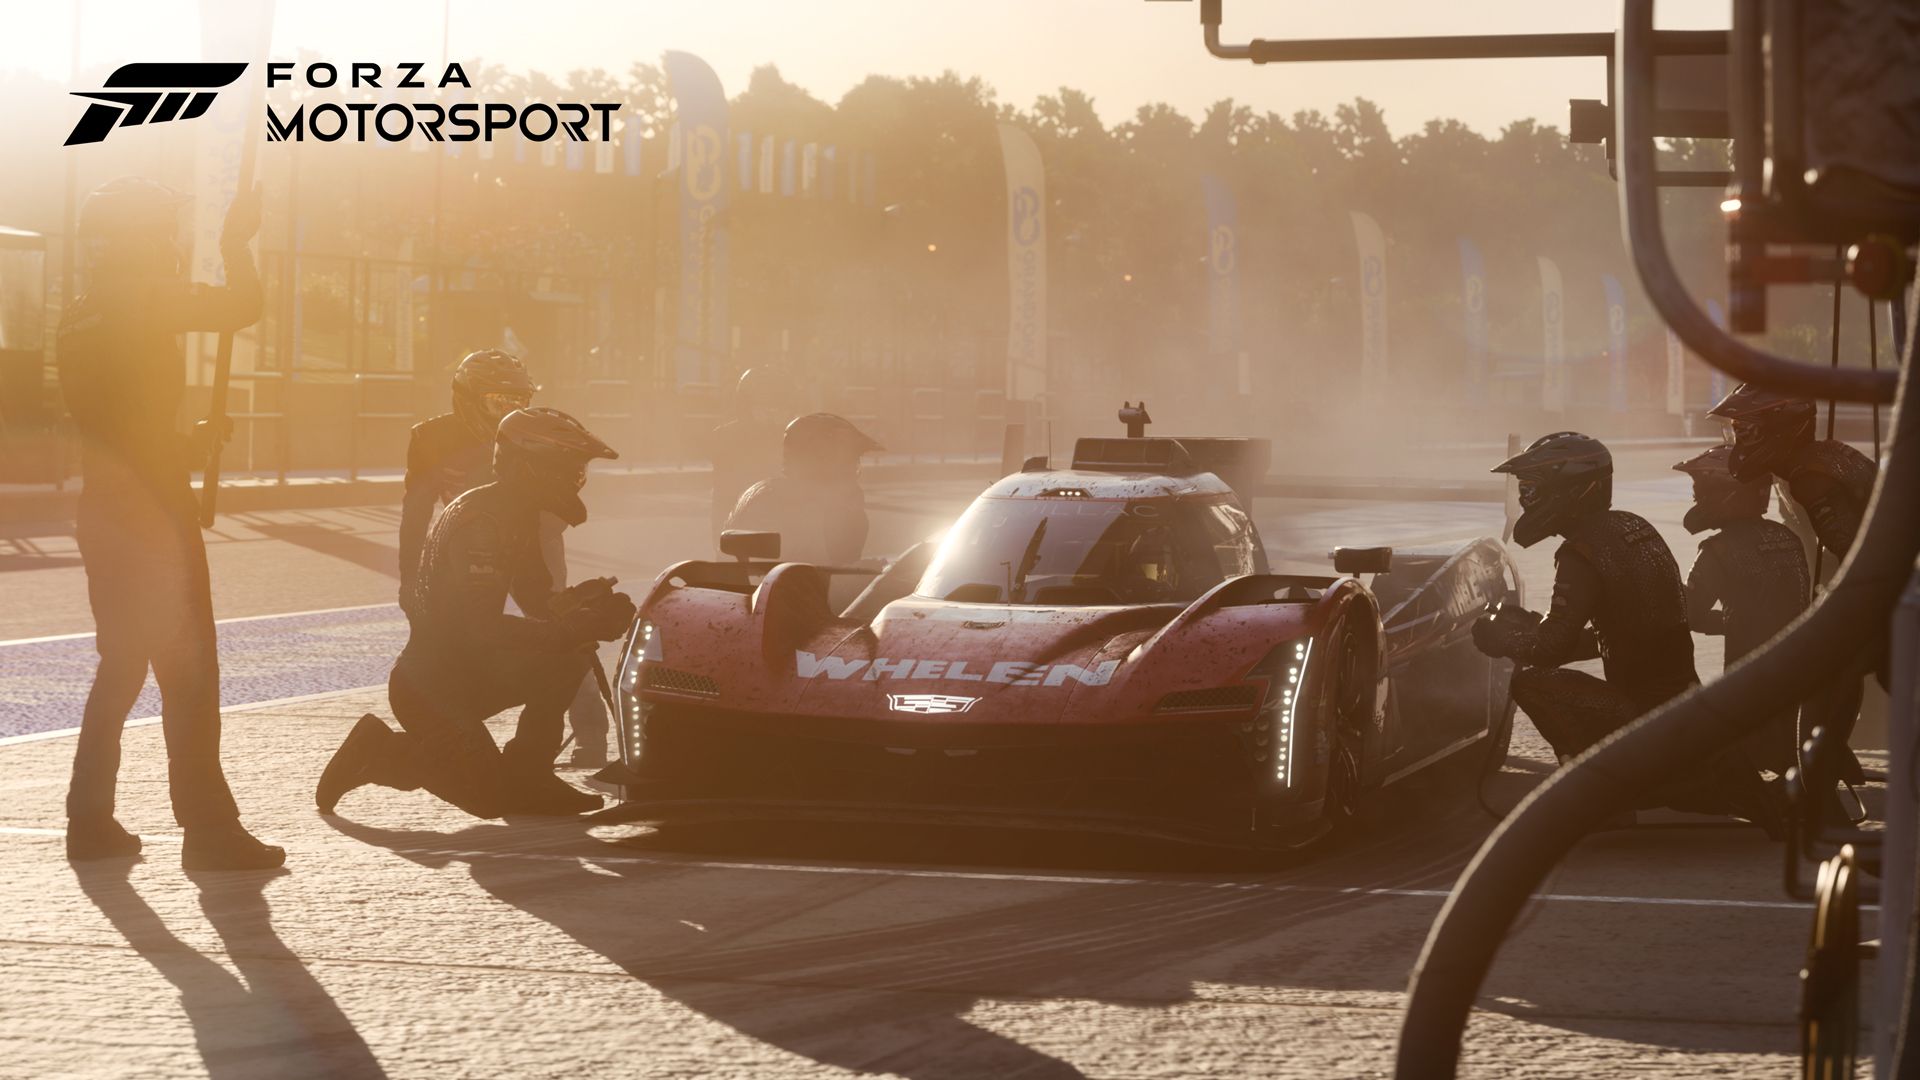 Forza Motorsport' arrives later this year on Xbox Series X/S, PC